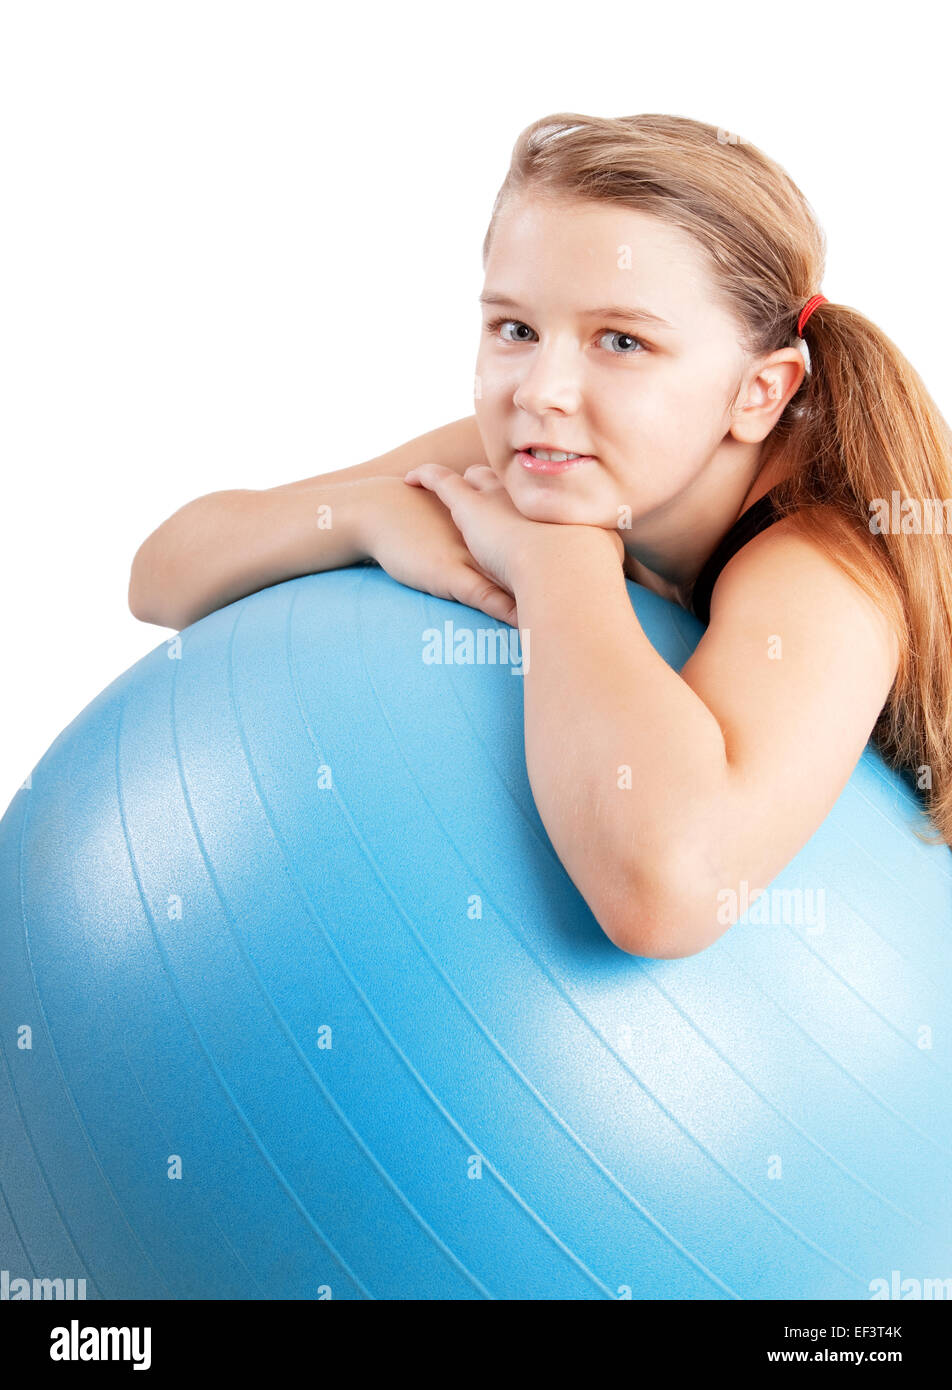 girl leaning on a fitness ball Stock Photo